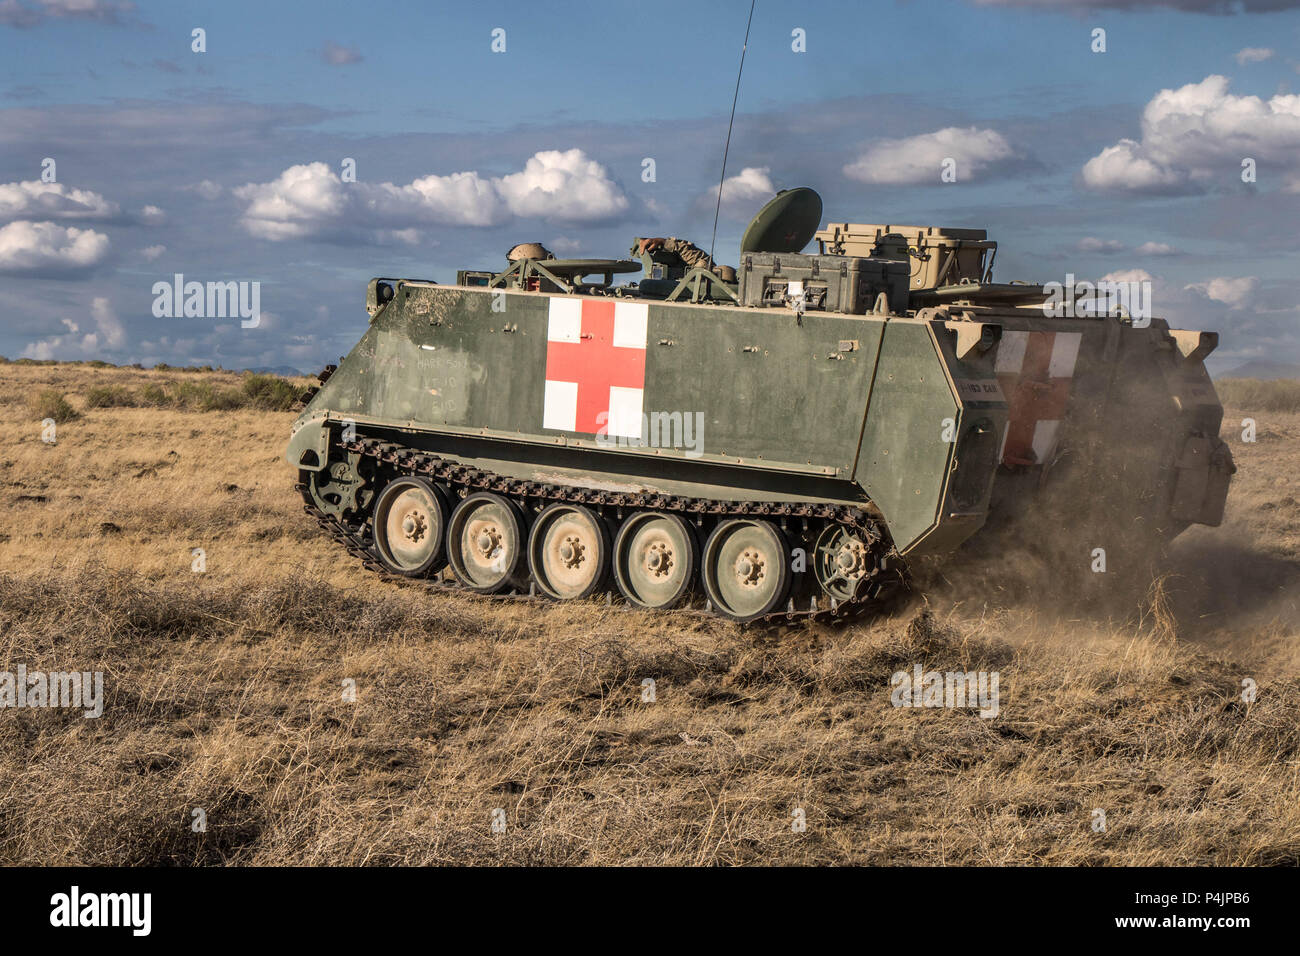 A medic M113 armored personnel carrier moves toward an objective during a simulated exercise at Orchard Training Center, Idaho, on June 19, 2018. The exercise allowed medics to perform simulated training of casualties within an armored vehicle. (U.S. Army photo by Spc. Michael Hunnisett) Stock Photo